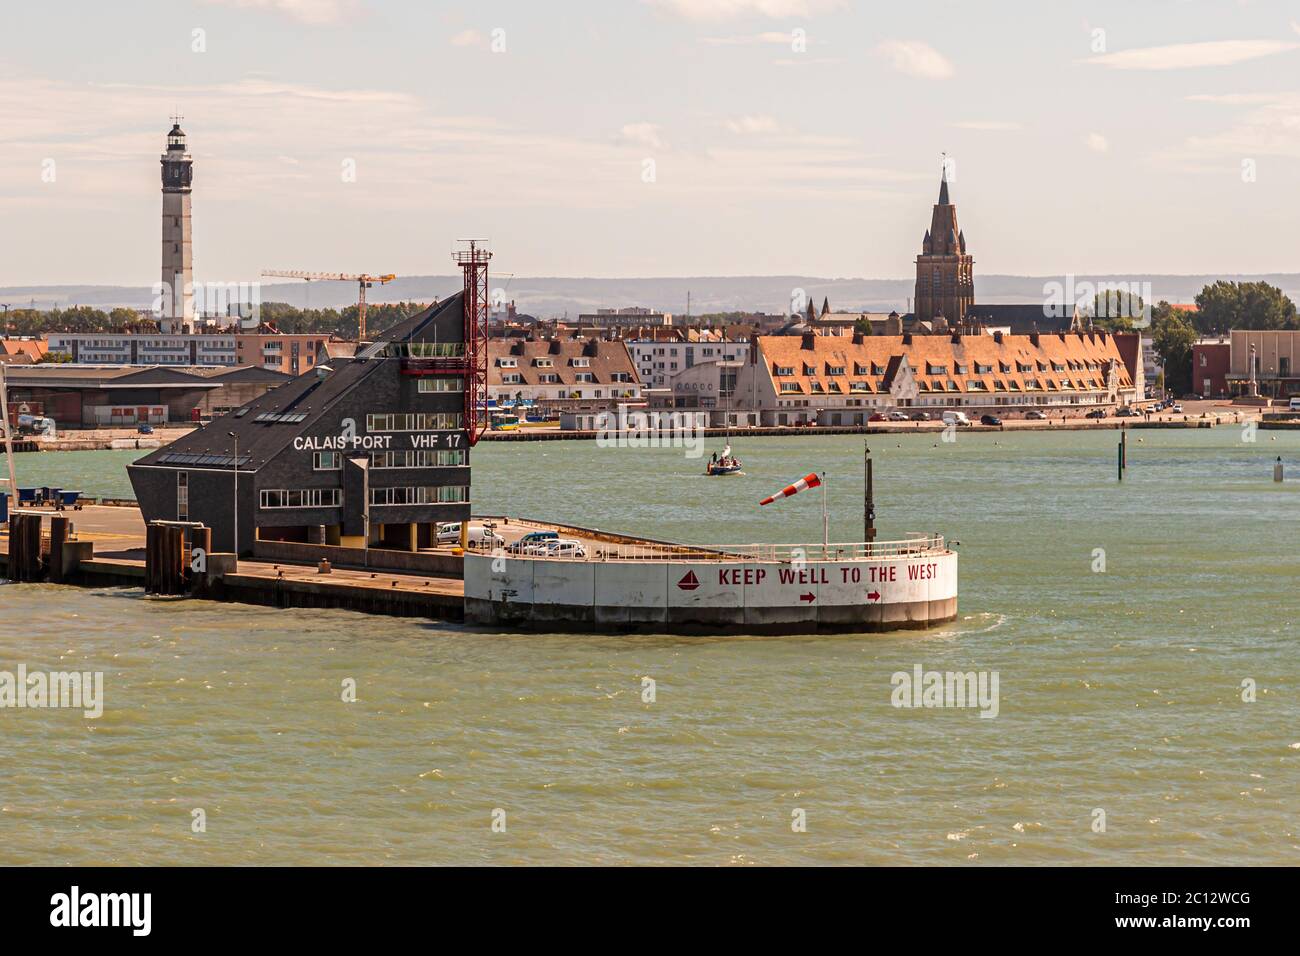 The port and the city of Calais seen from the sea, France Stock Photo